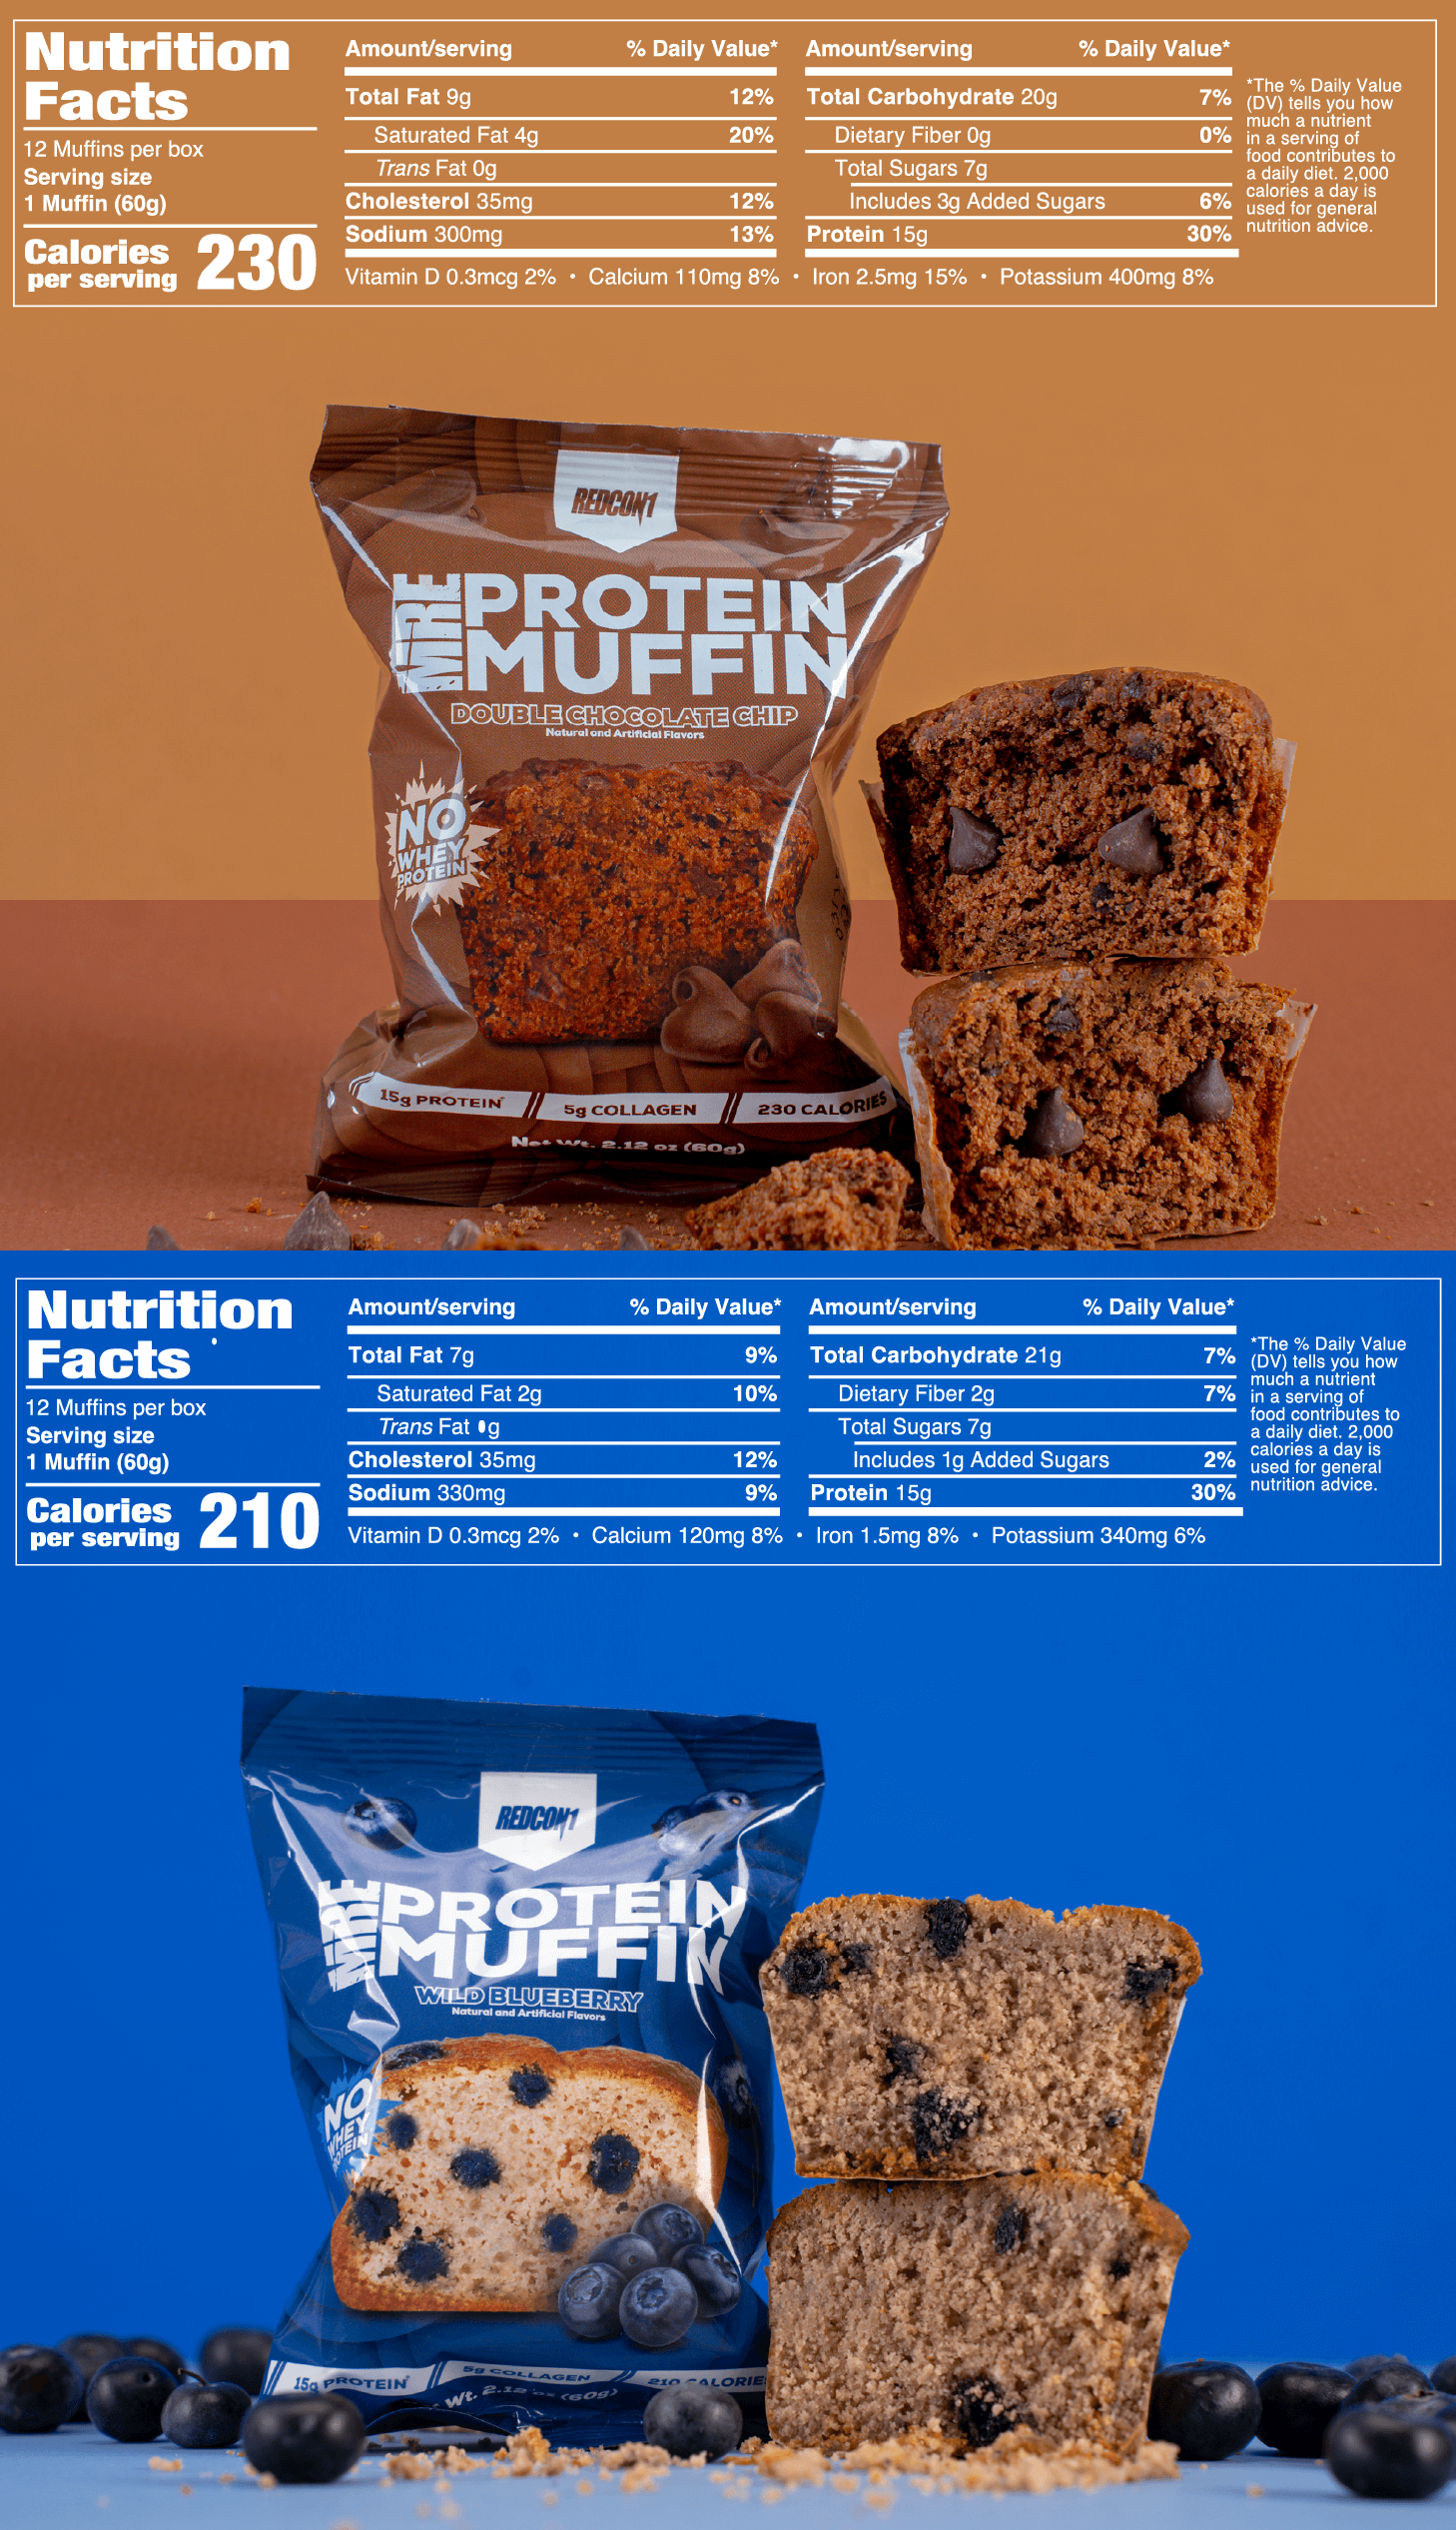 Nutrition facts for muffins, serving size 60g, 230 and 210 calories per serving. Contains 15g protein, fats, sodium, vitamins, and sugars.